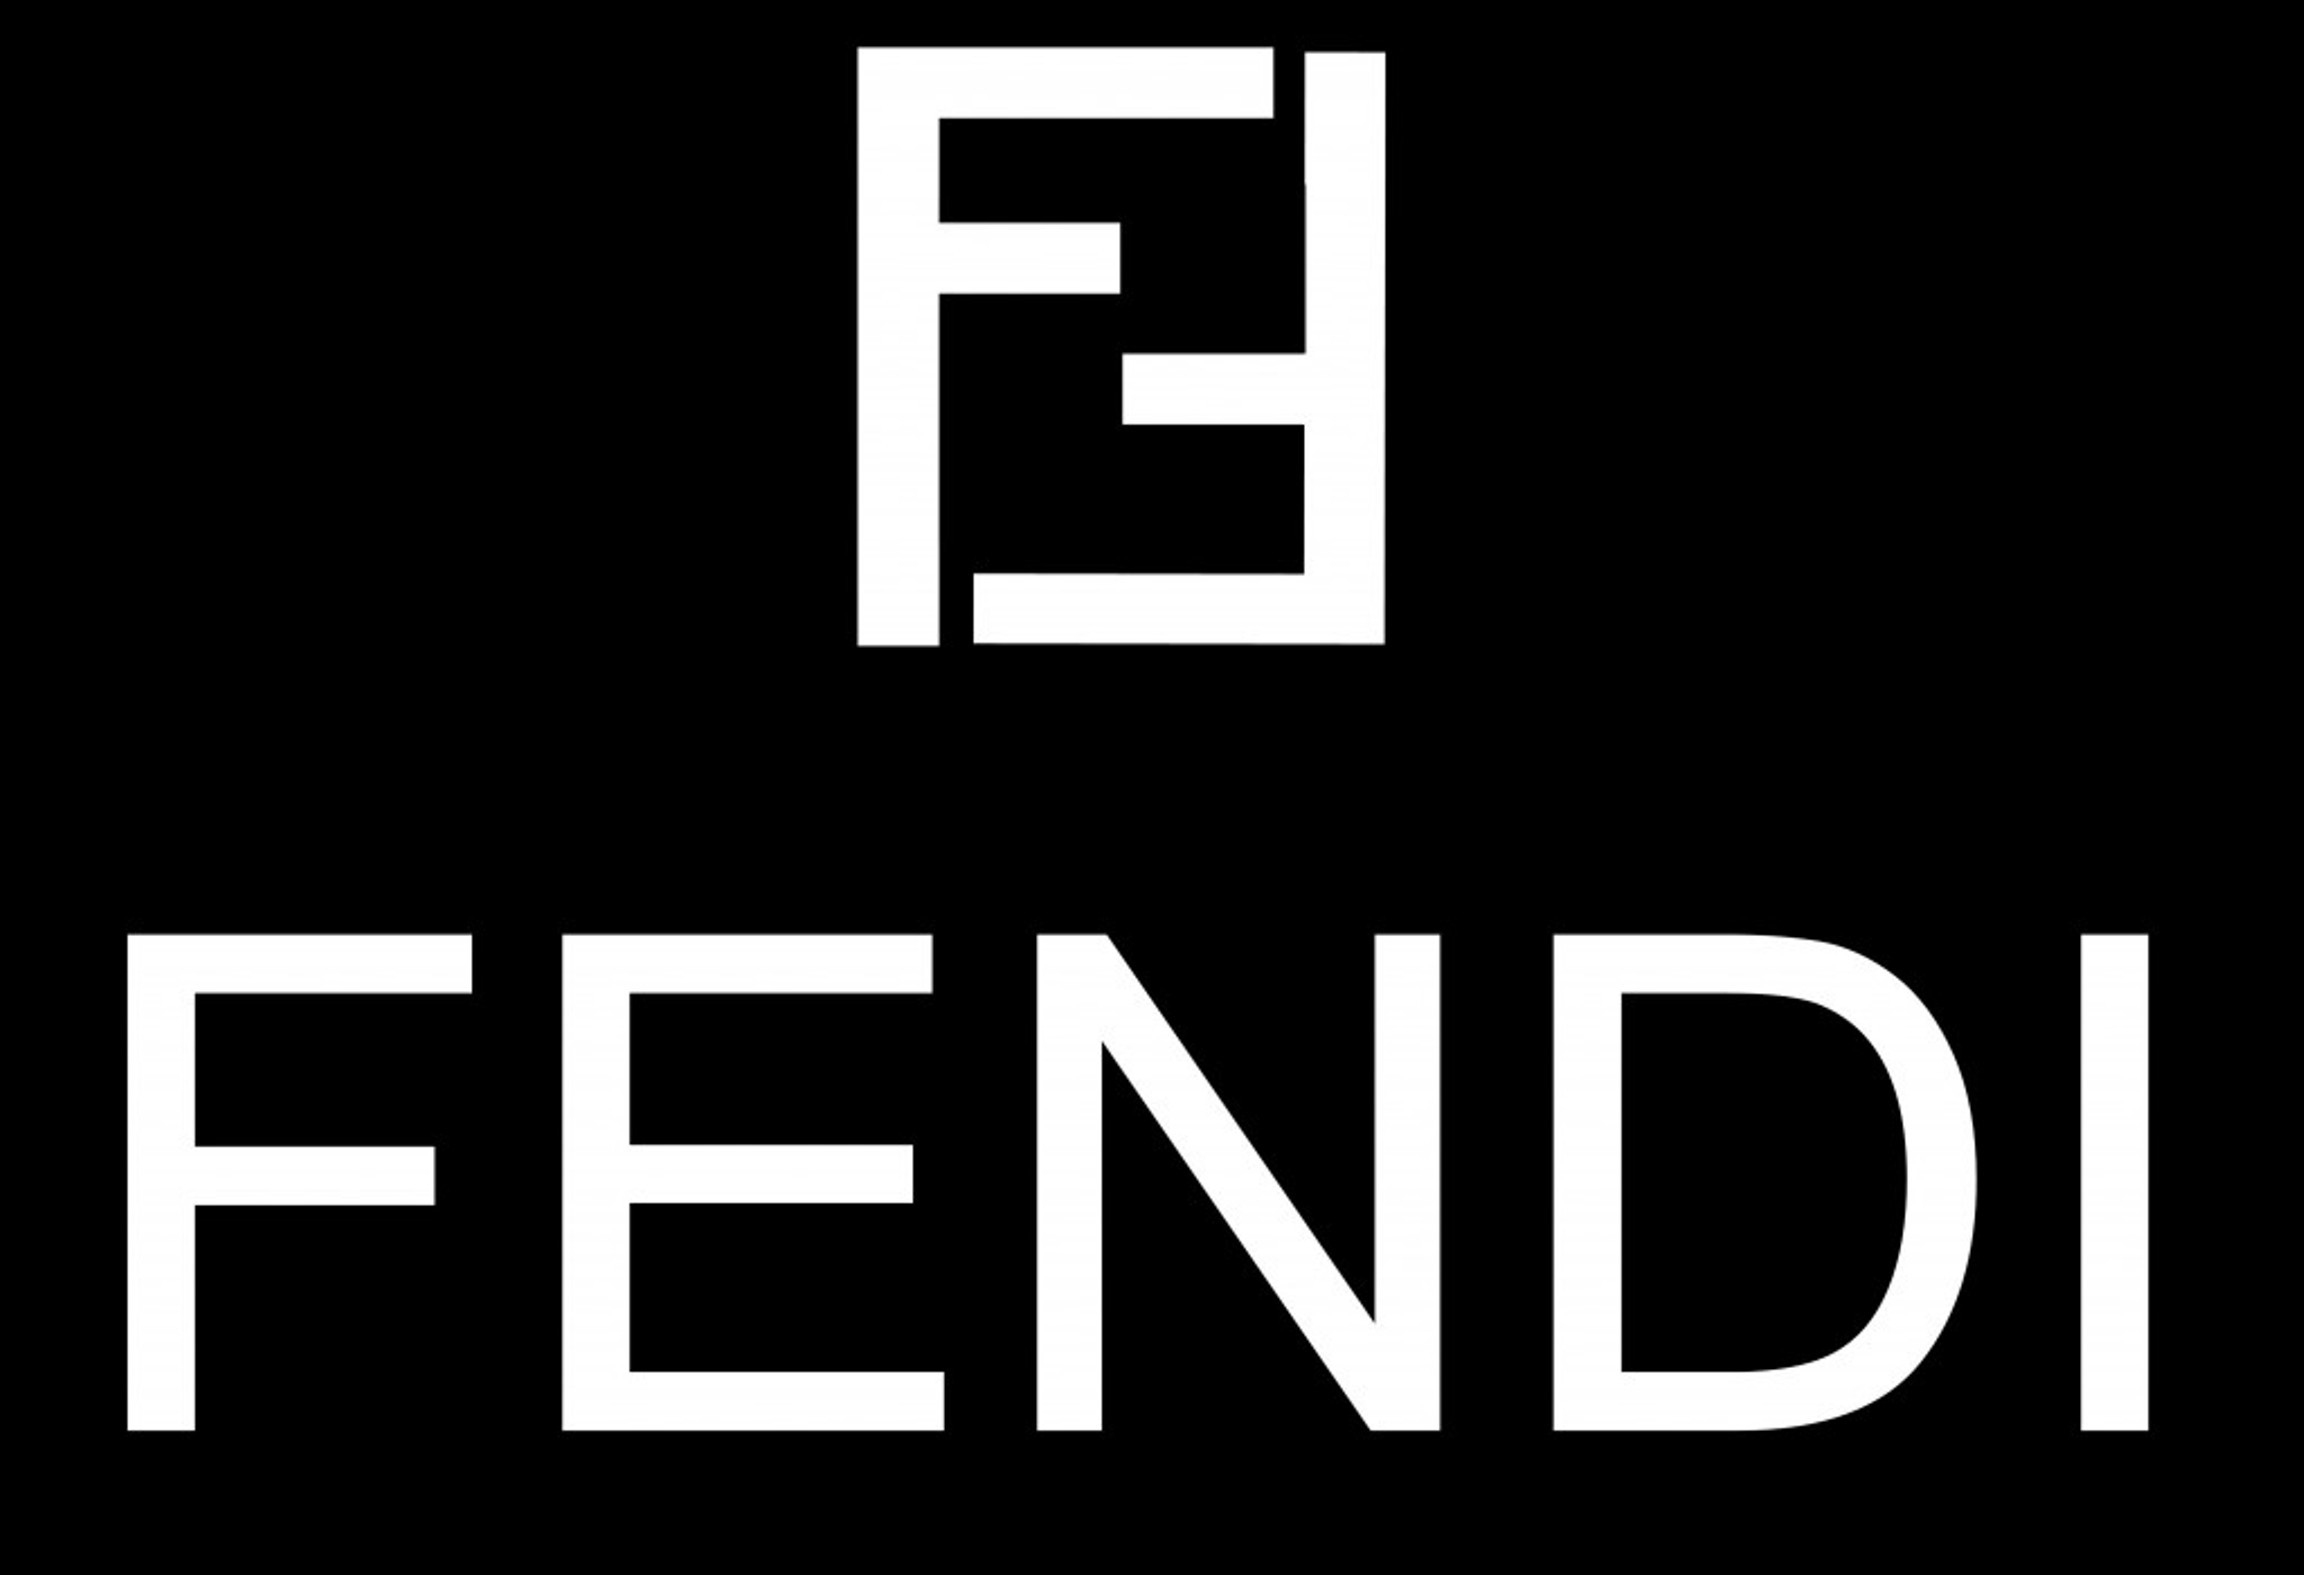 Fendi brand logo wallpapers and images - wallpapers, pictures, photos